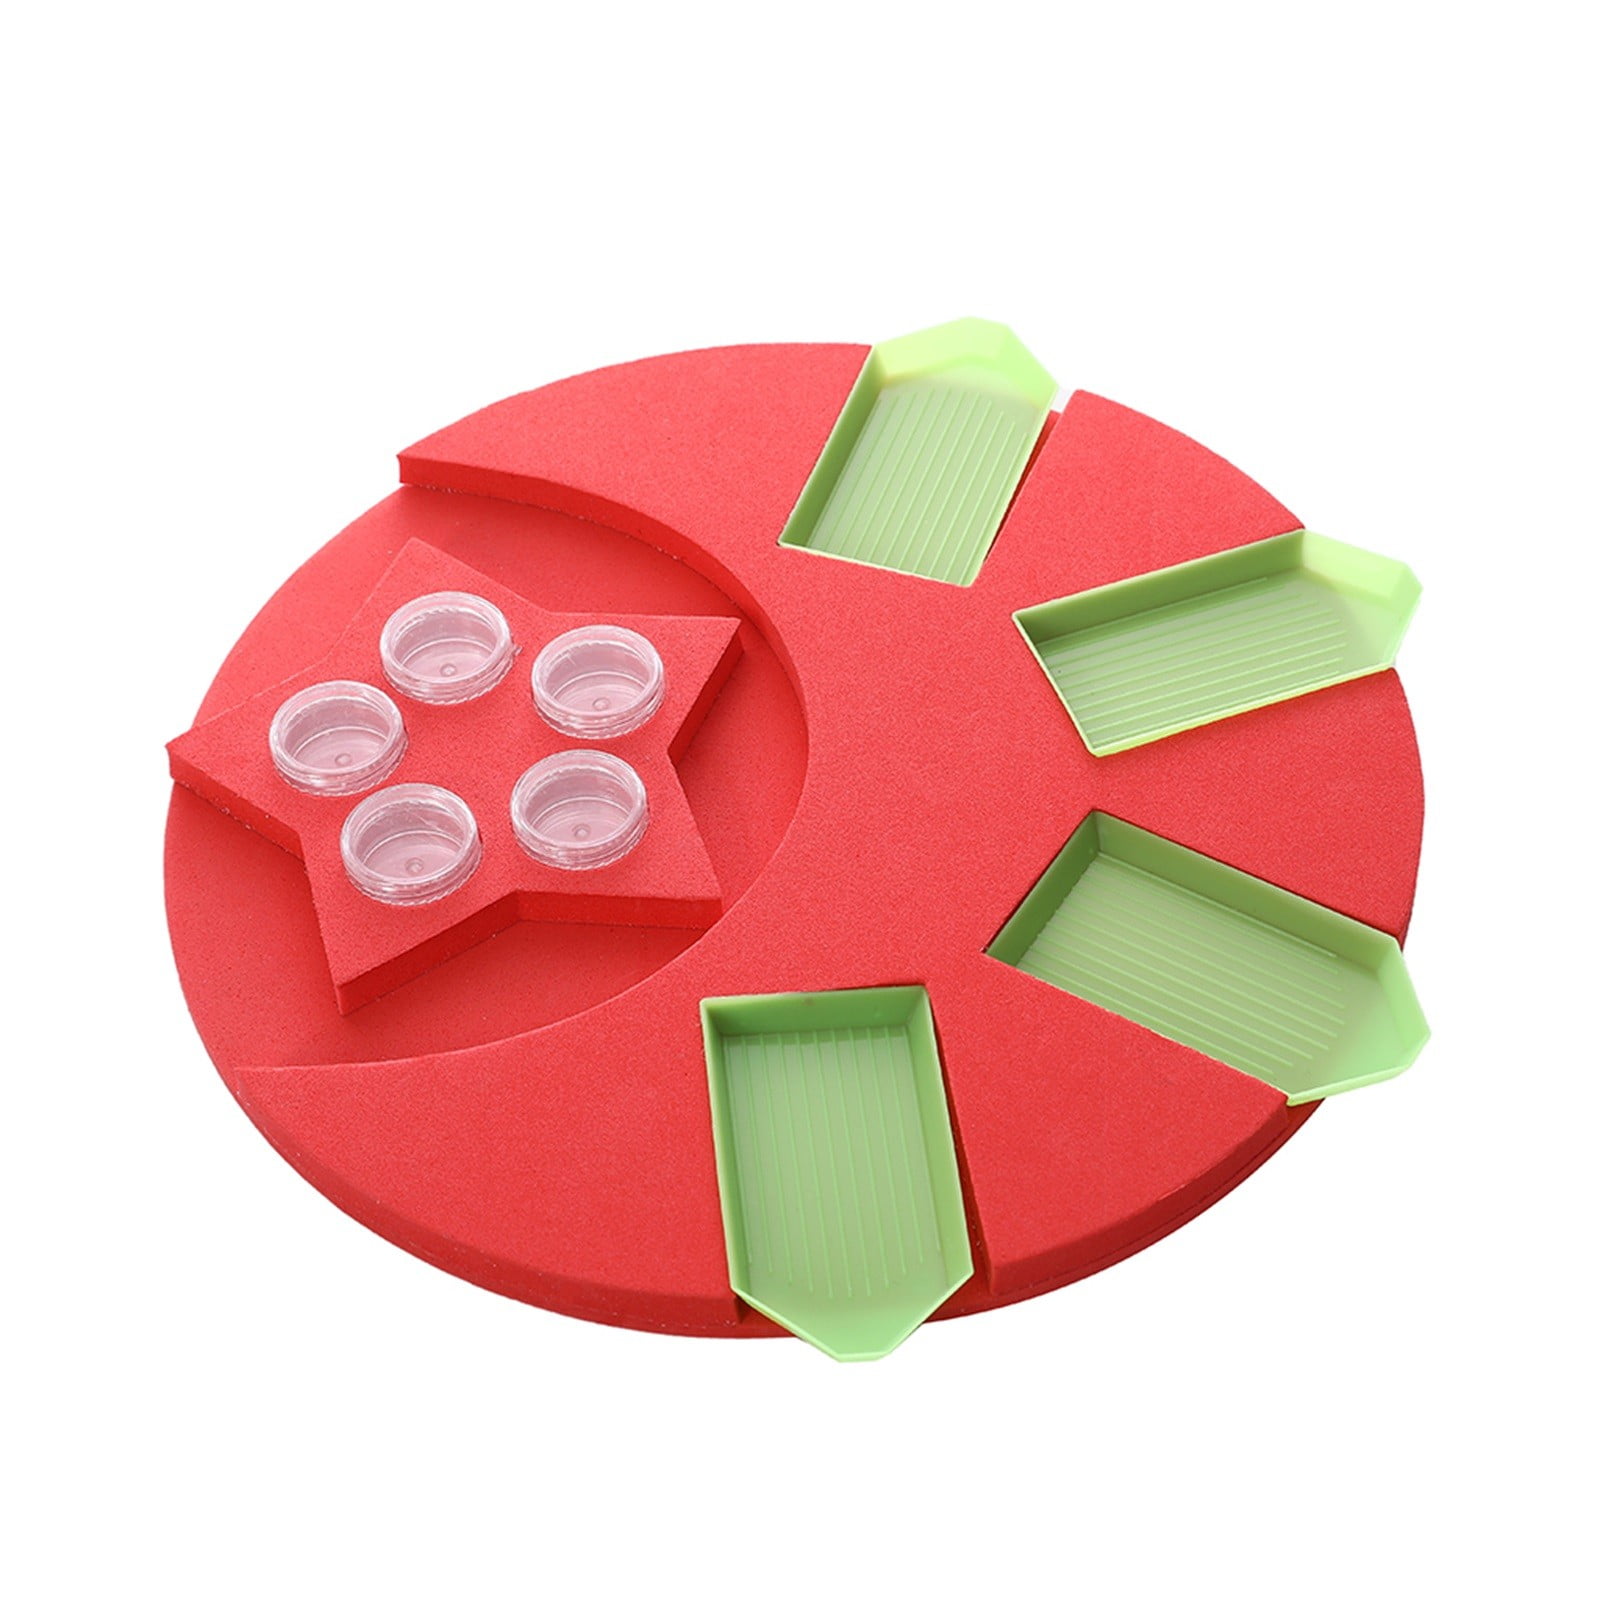 Kiplyki Wholesale Diamond Painting Accessories Tray Organizer Multi-Boat  Holder for Jar Container 